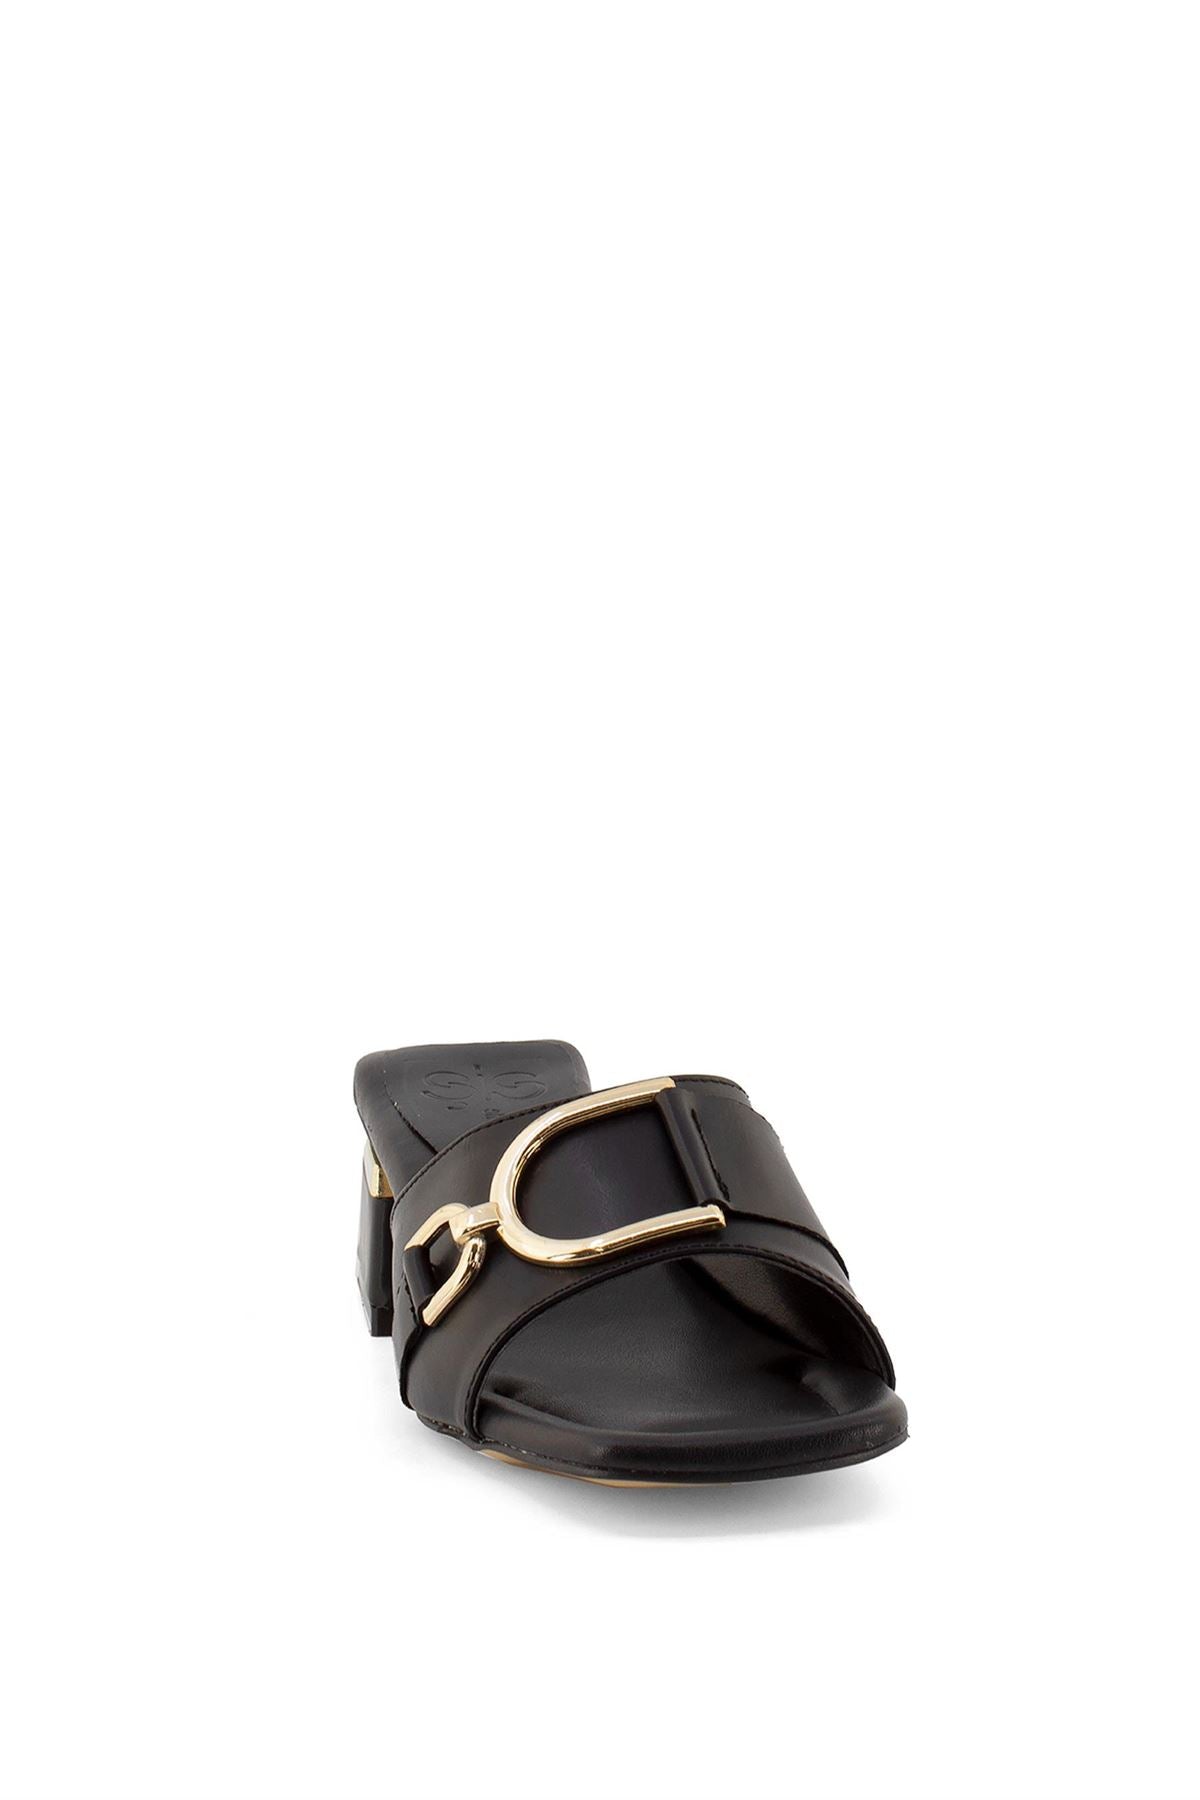 Women's black slippers with buckle detail - STREETMODE™